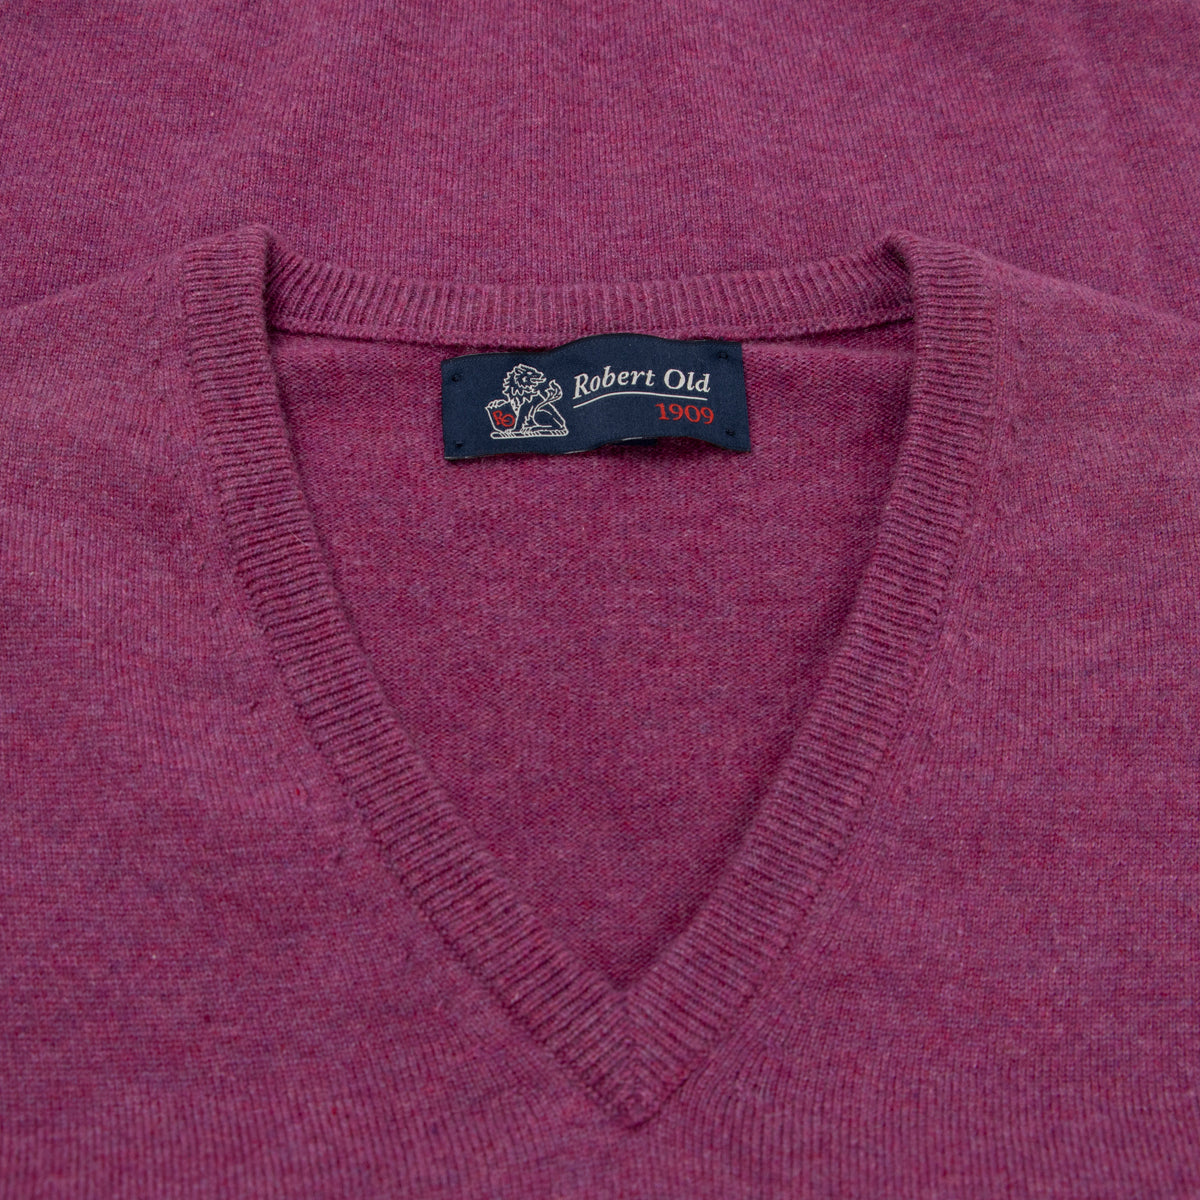 Loganberry Chatsworth 2ply V-Neck Cashmere Sweater  Robert Old   